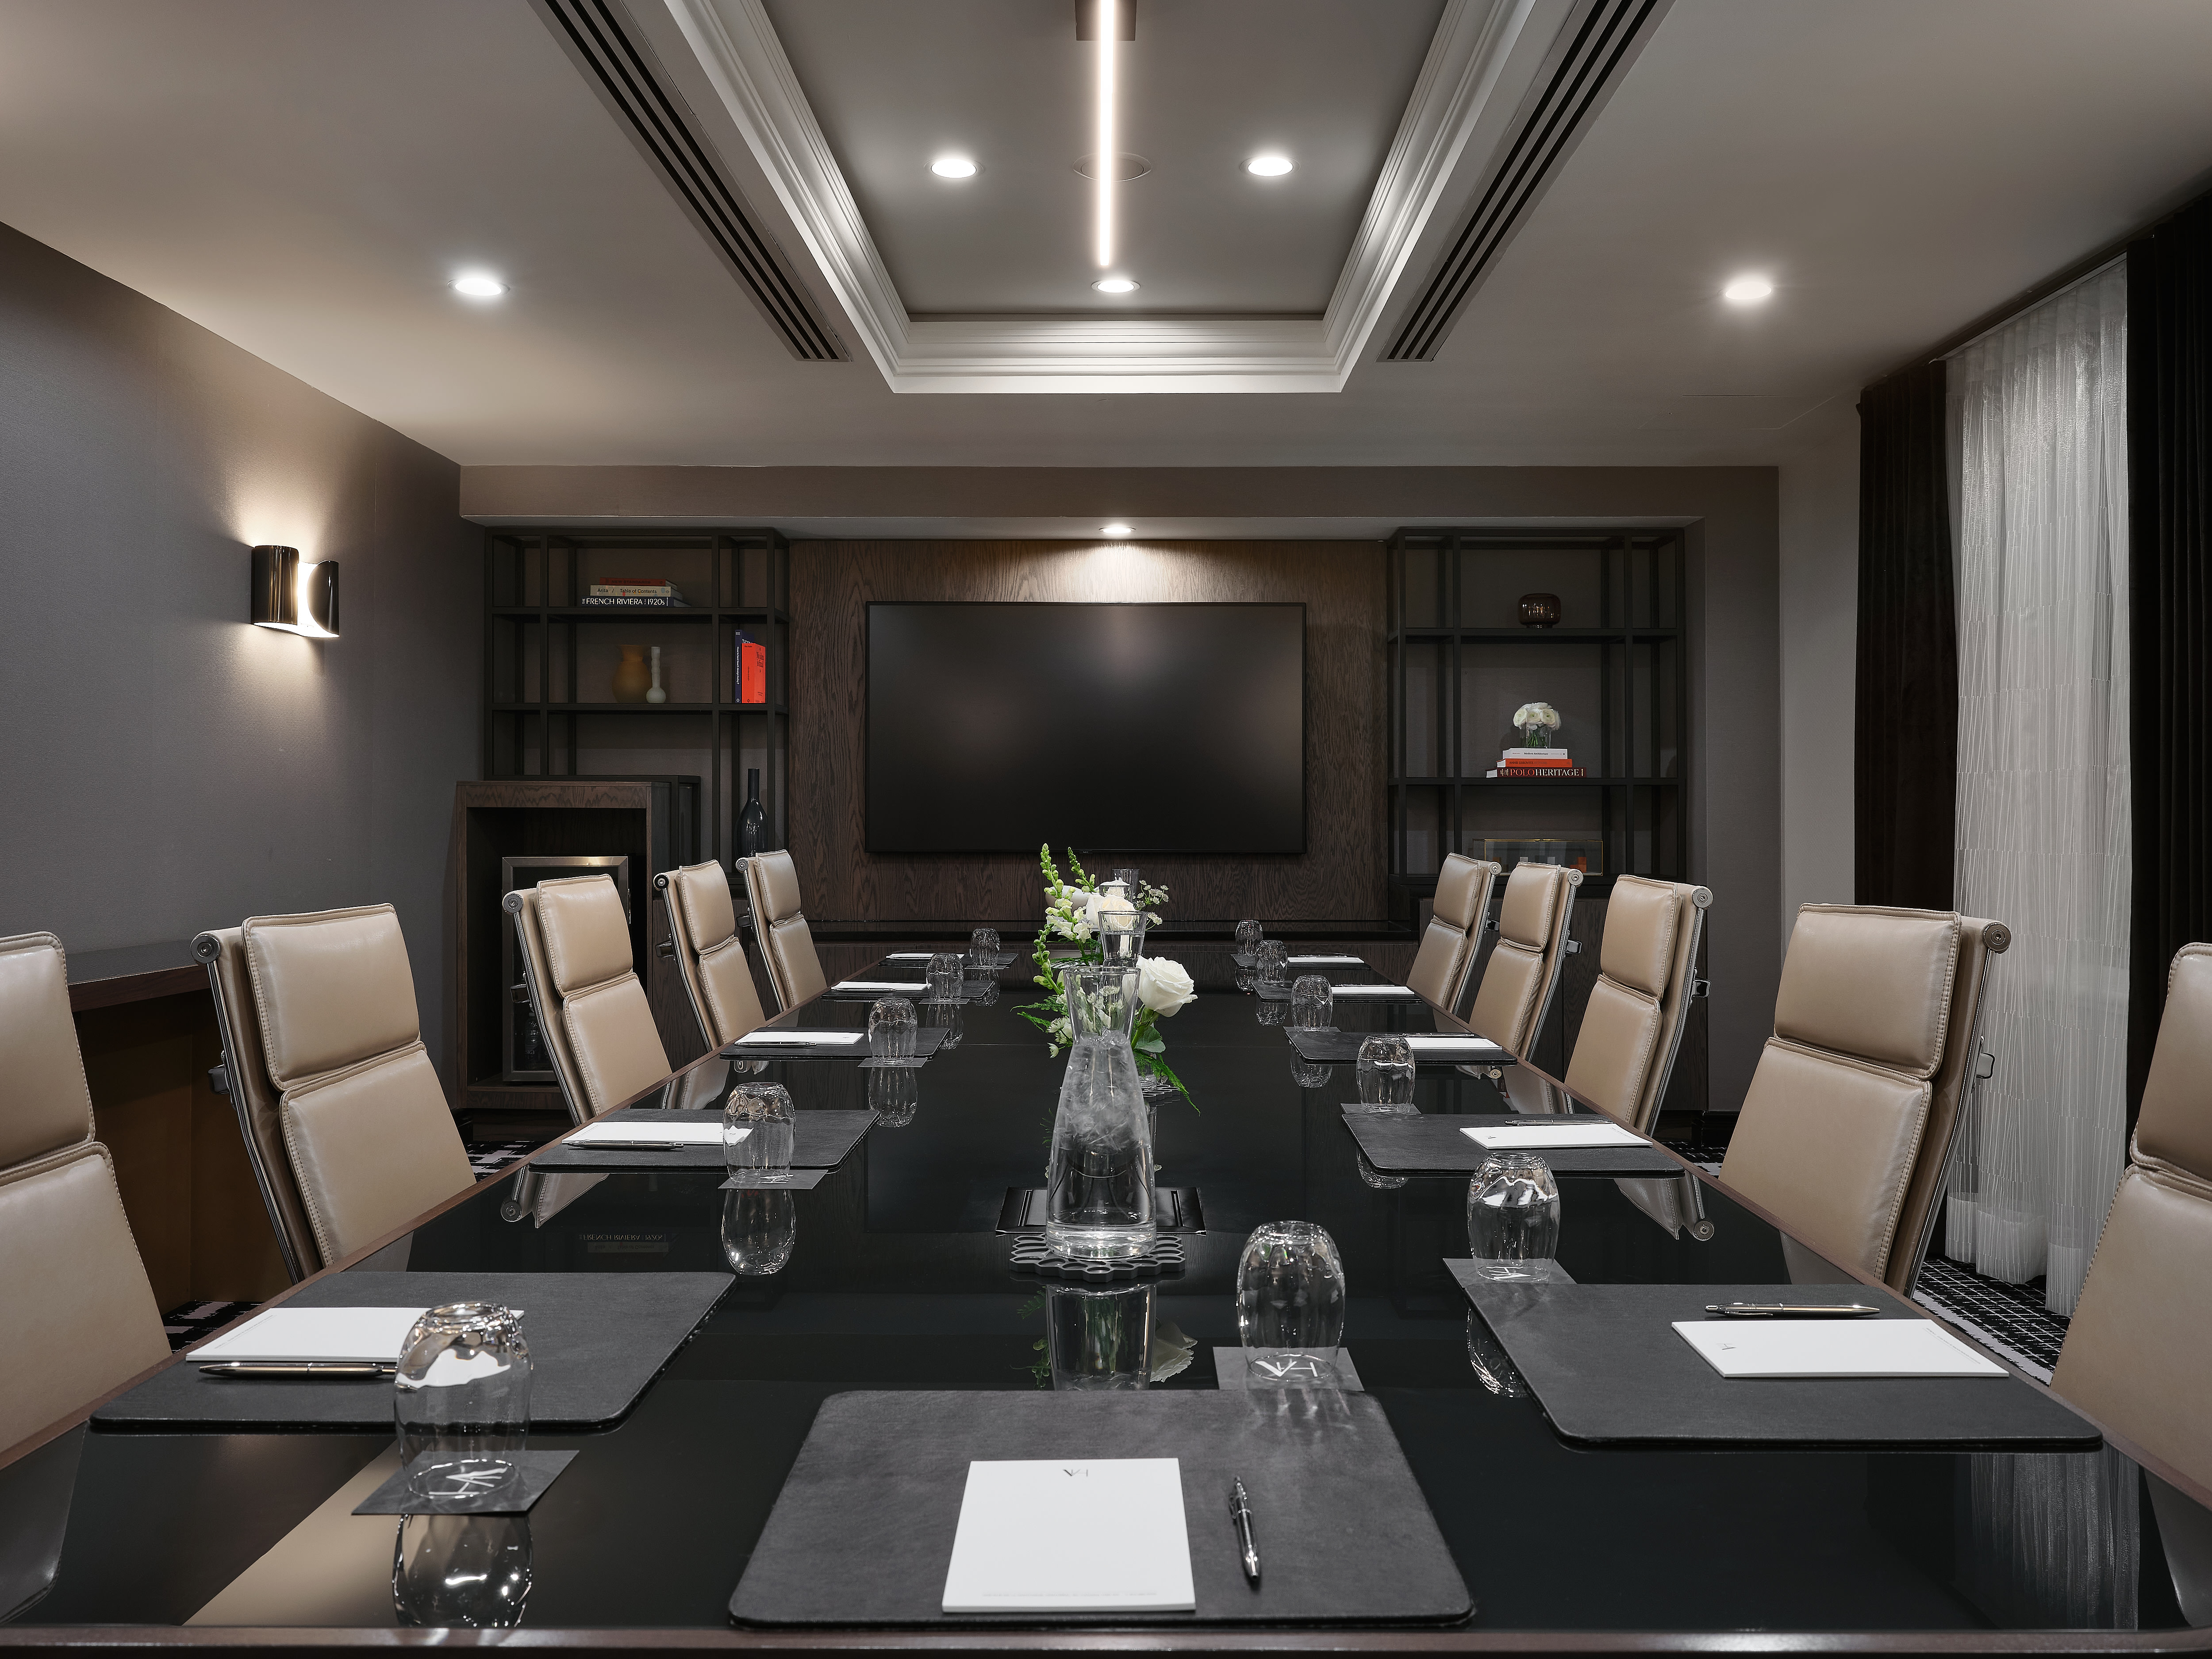 Meeting Room With Executive Table